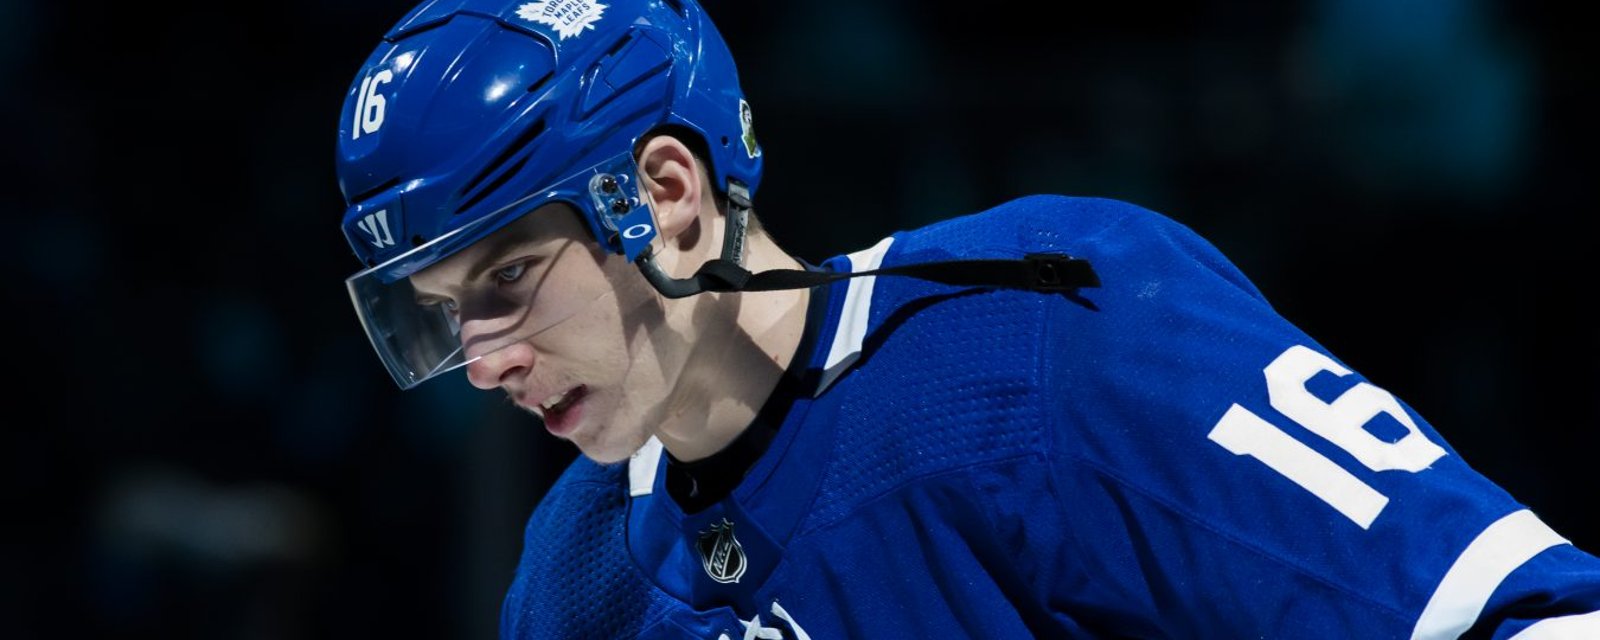 A lot of controversy on Marner’s expected salary demands 